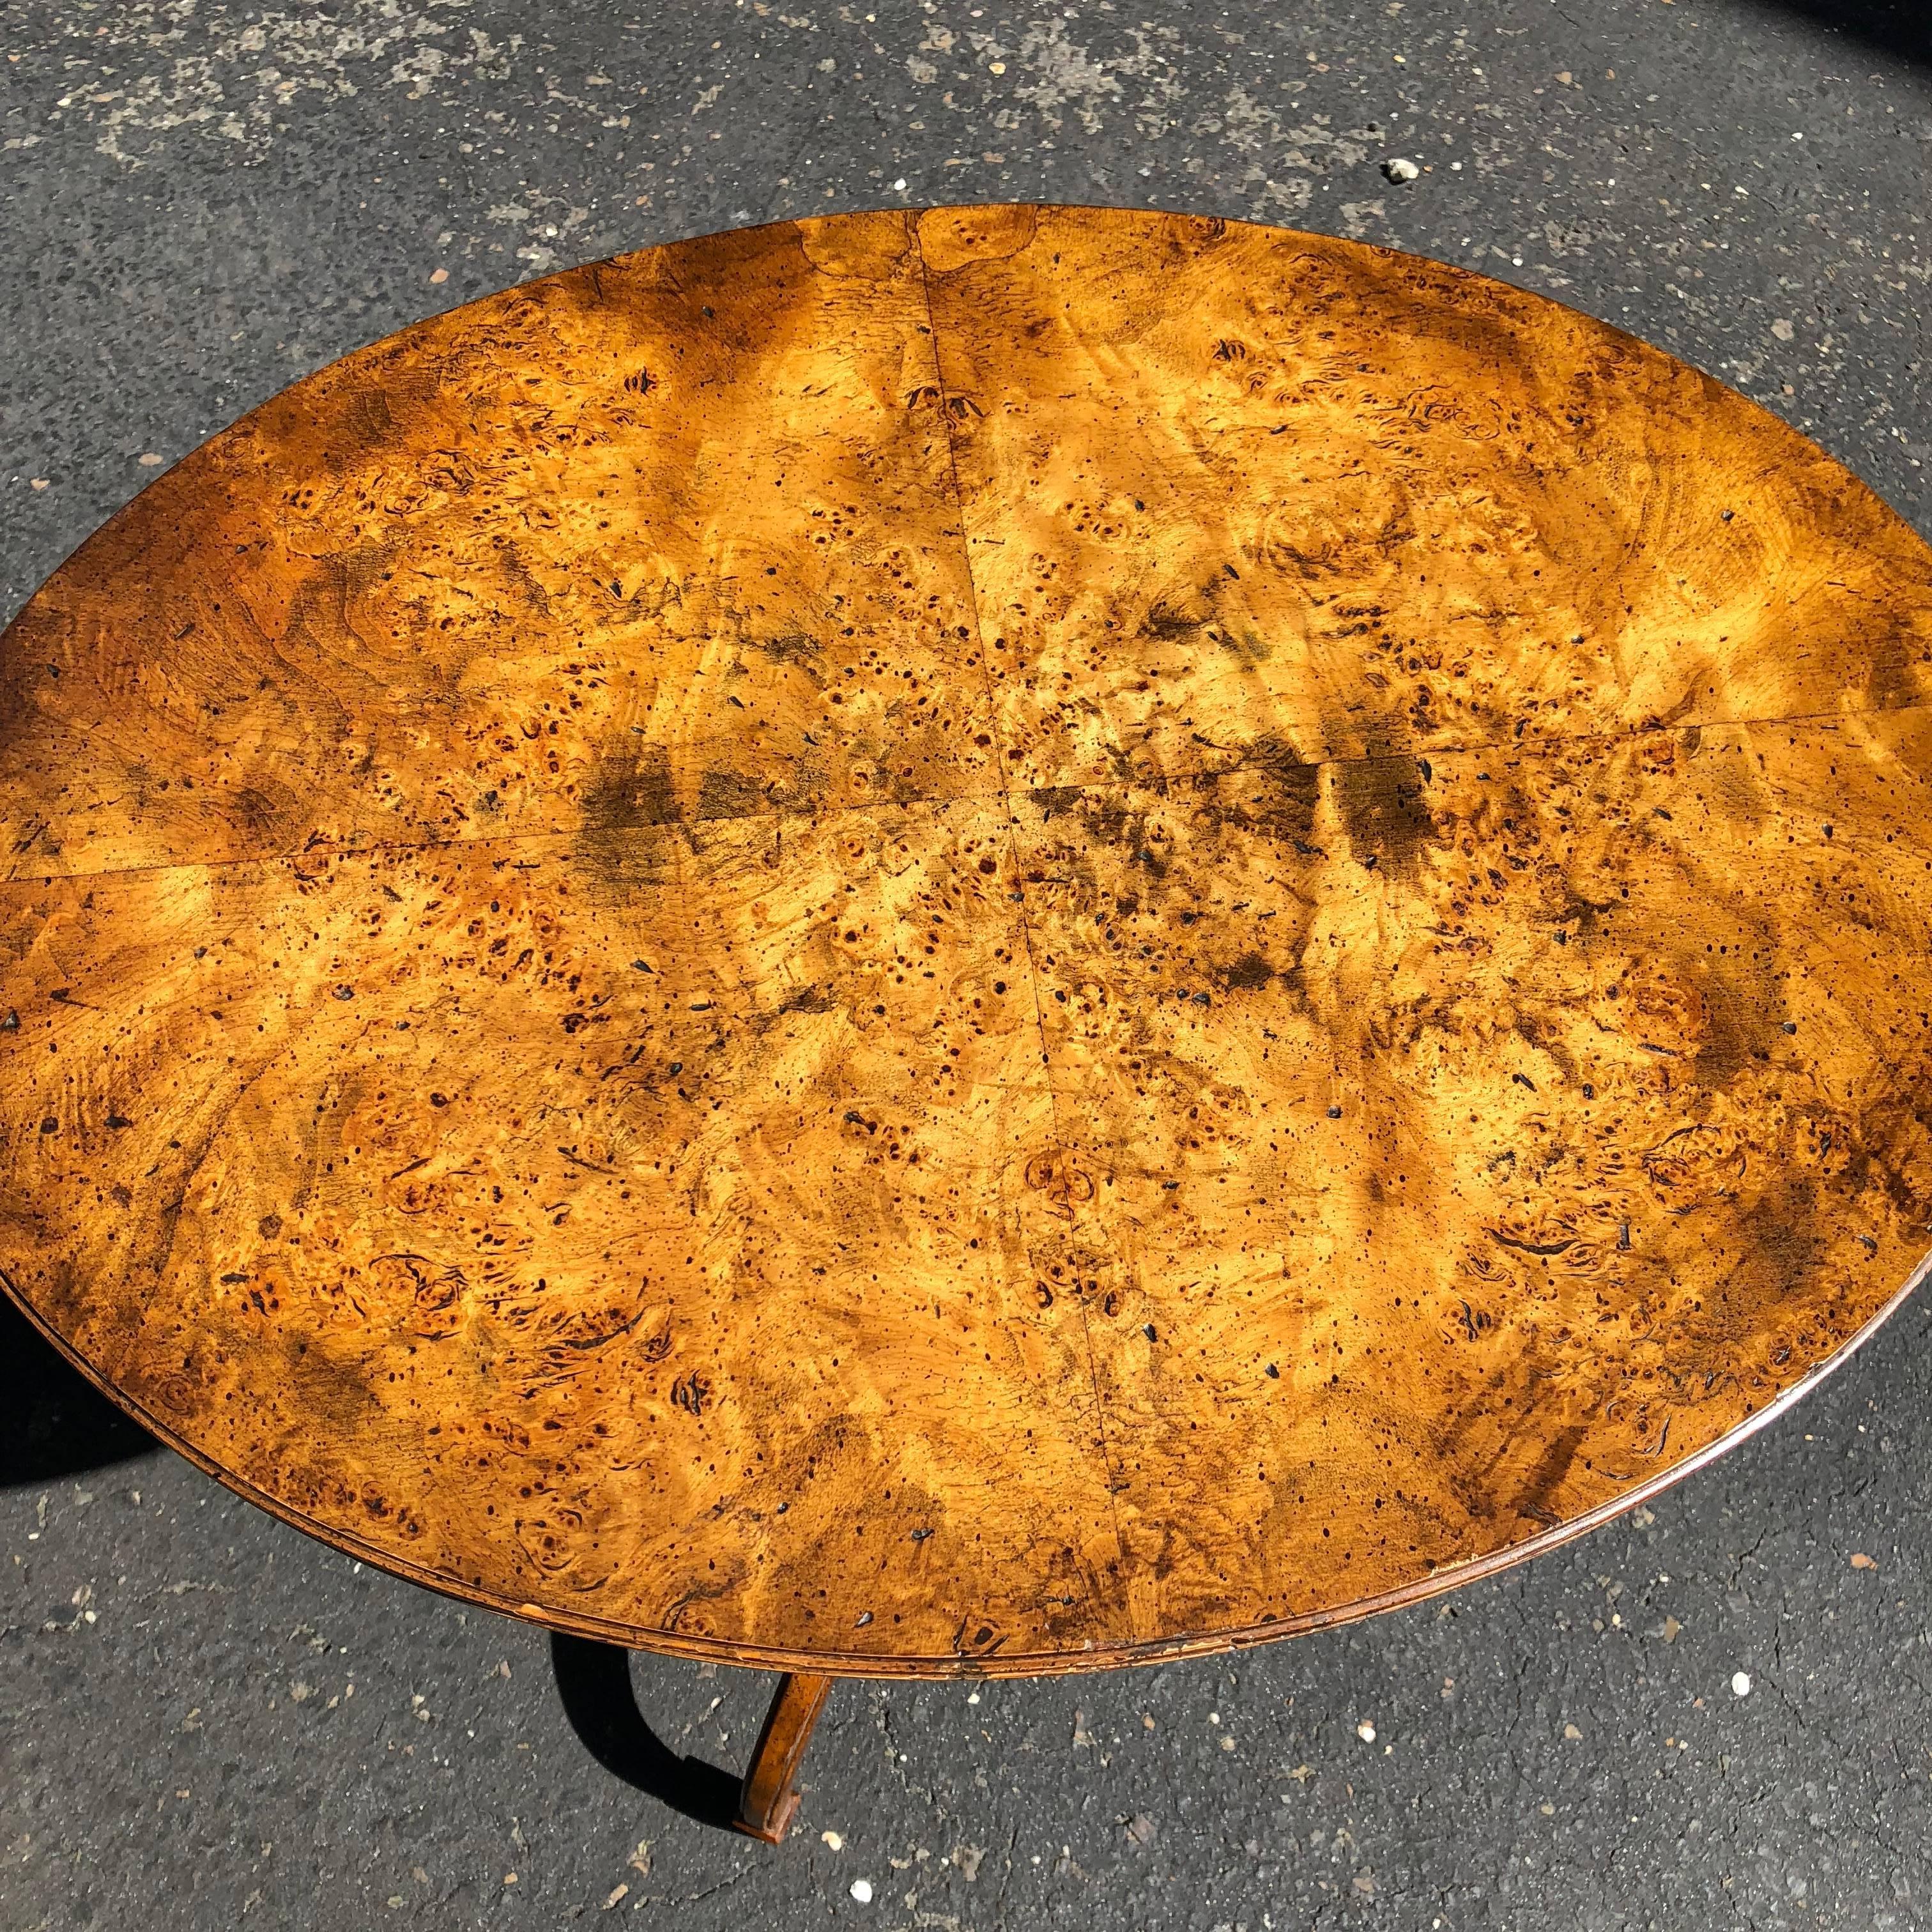 Pair of Mid-Century Modern burl wood lamp or side tables by Weiman.